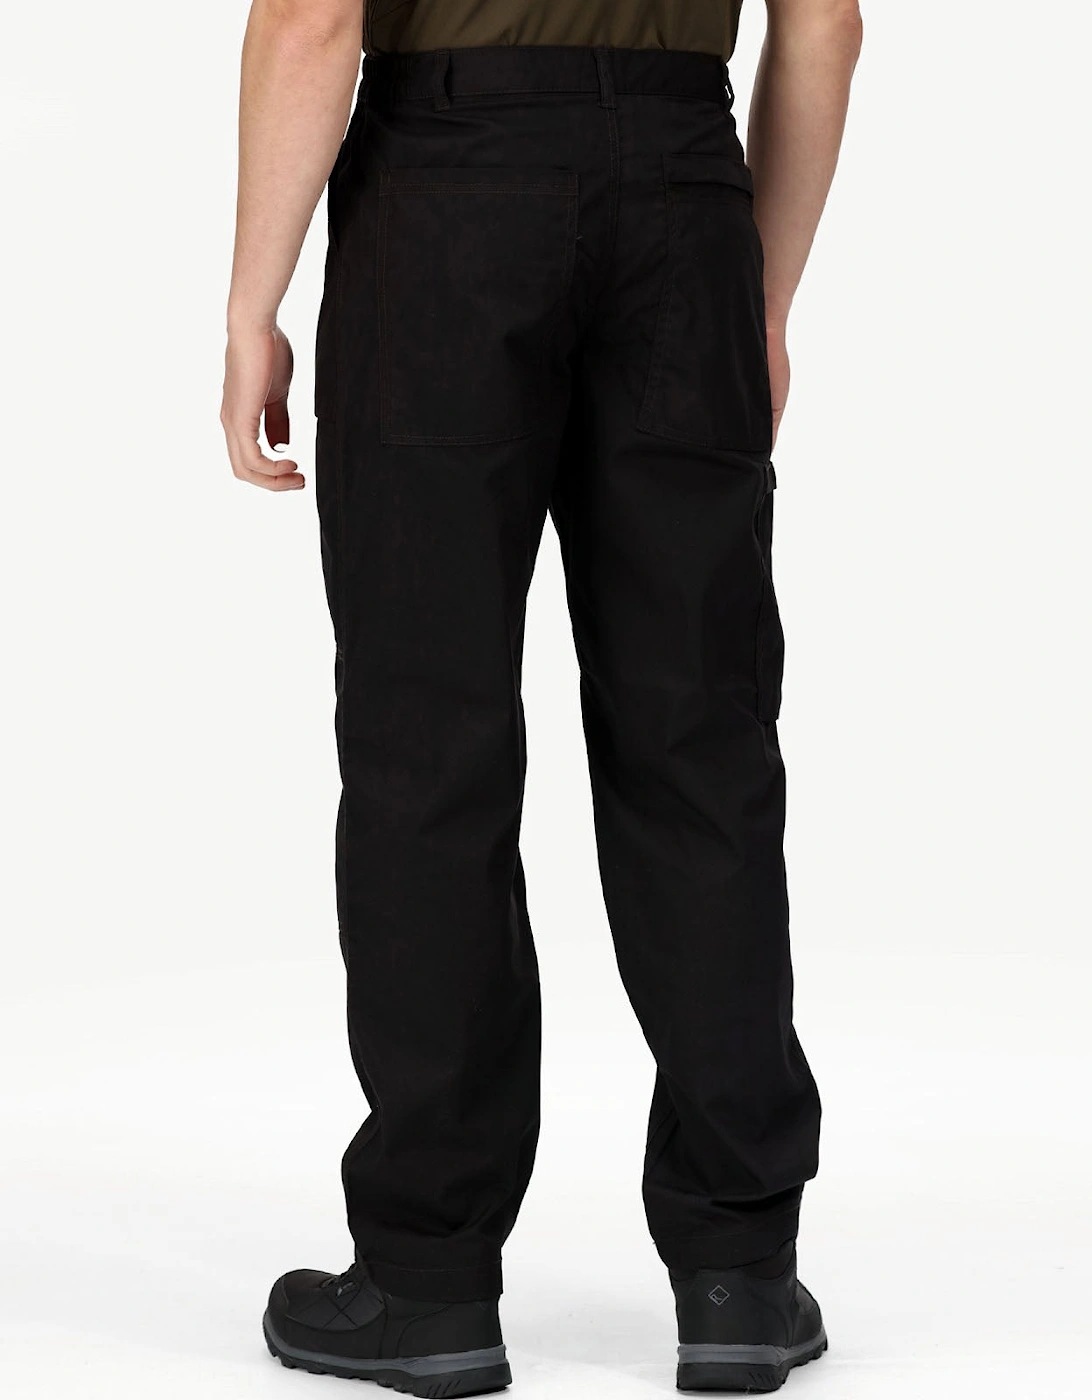 Professional Mens New cargo Workwear Trousers